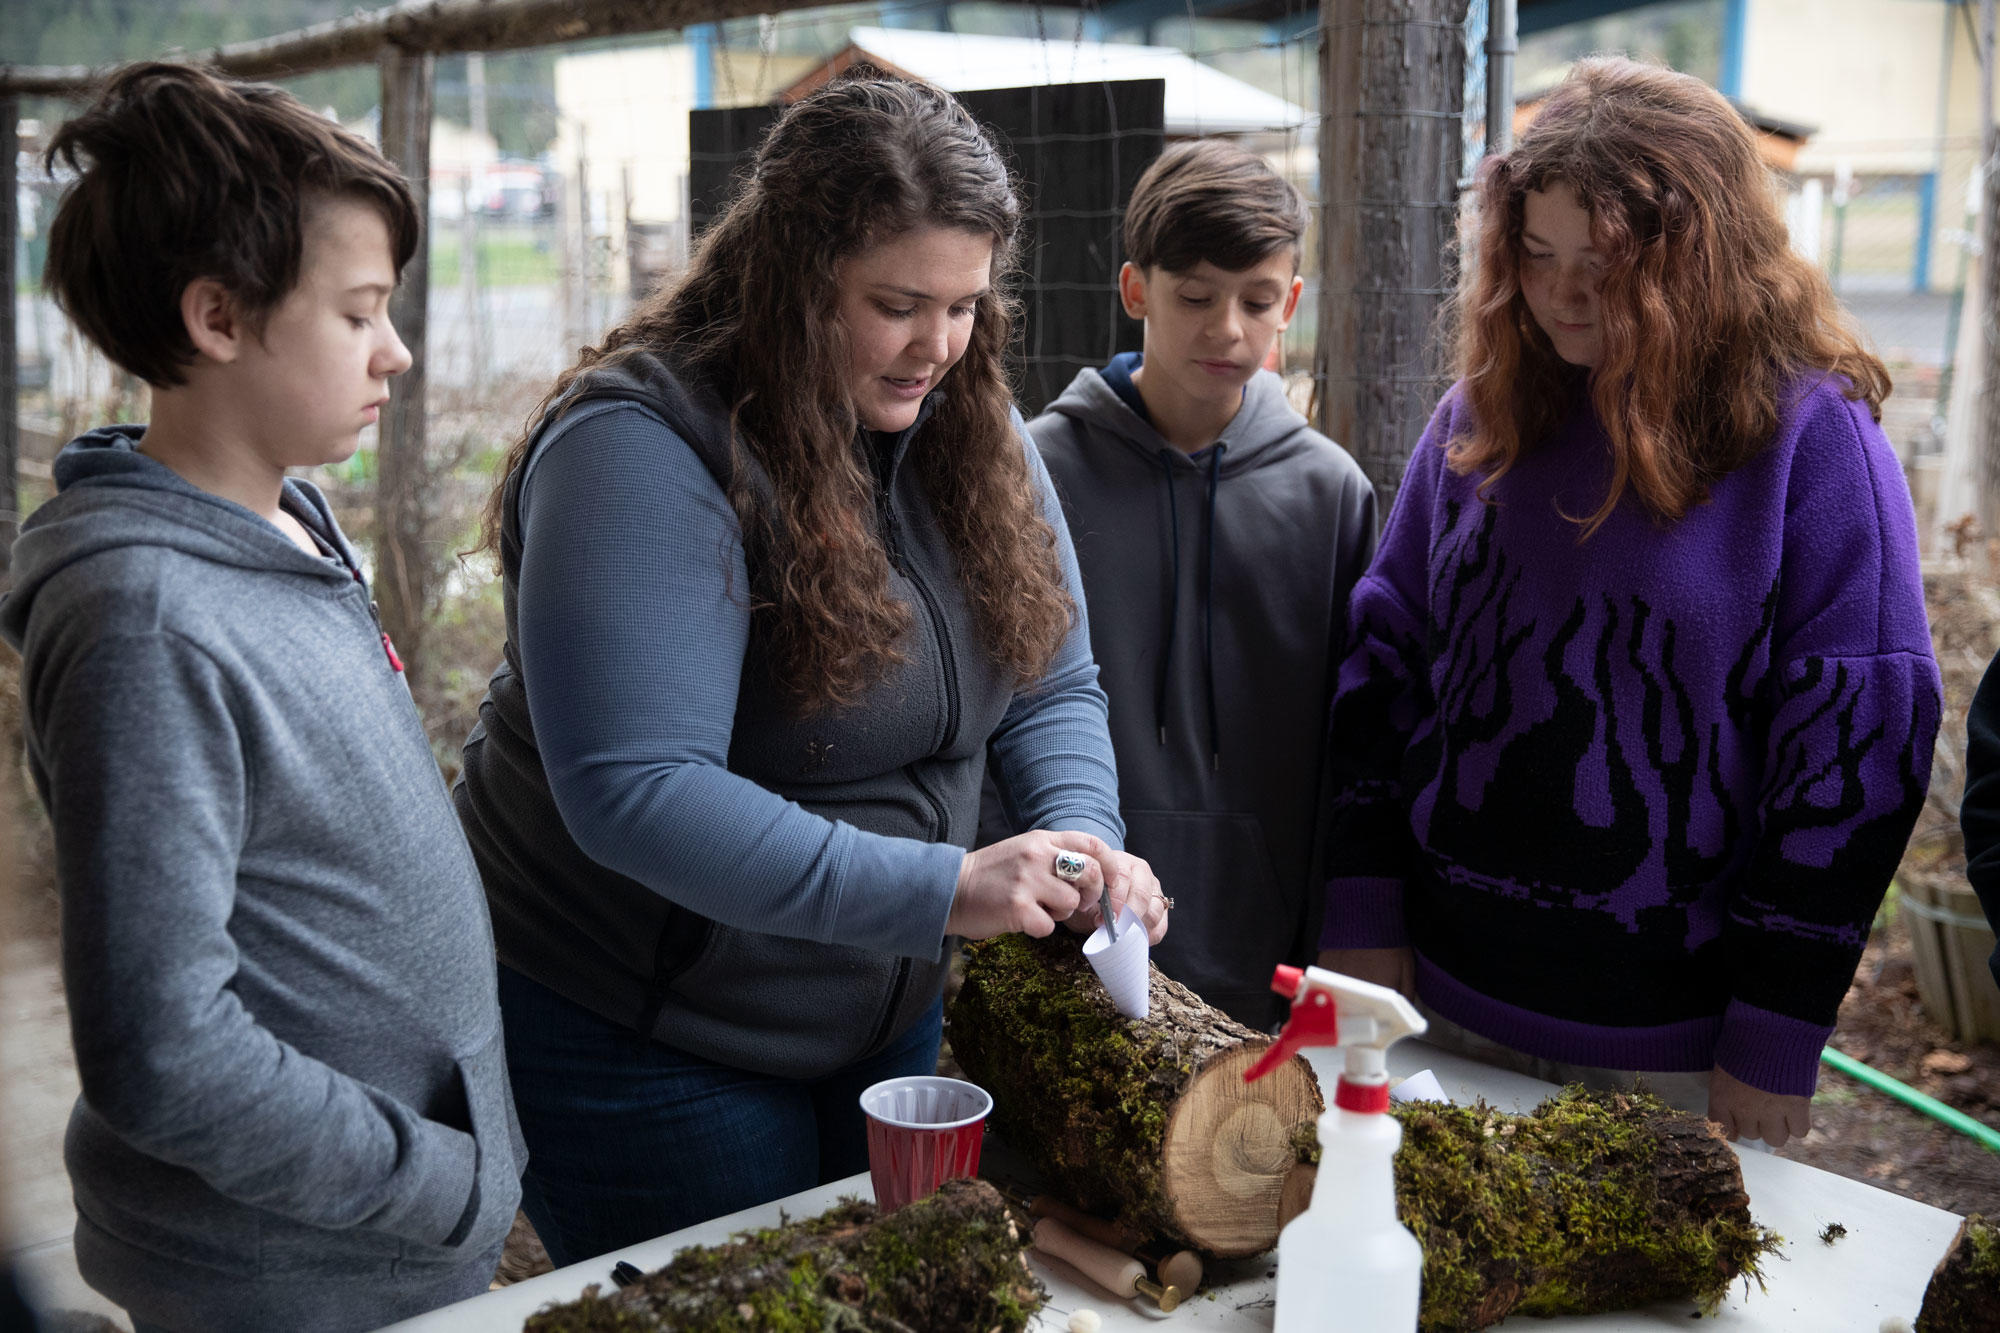 A woman uses a paper funnel to put sawdust in a hole in a log while sixth graders watch.